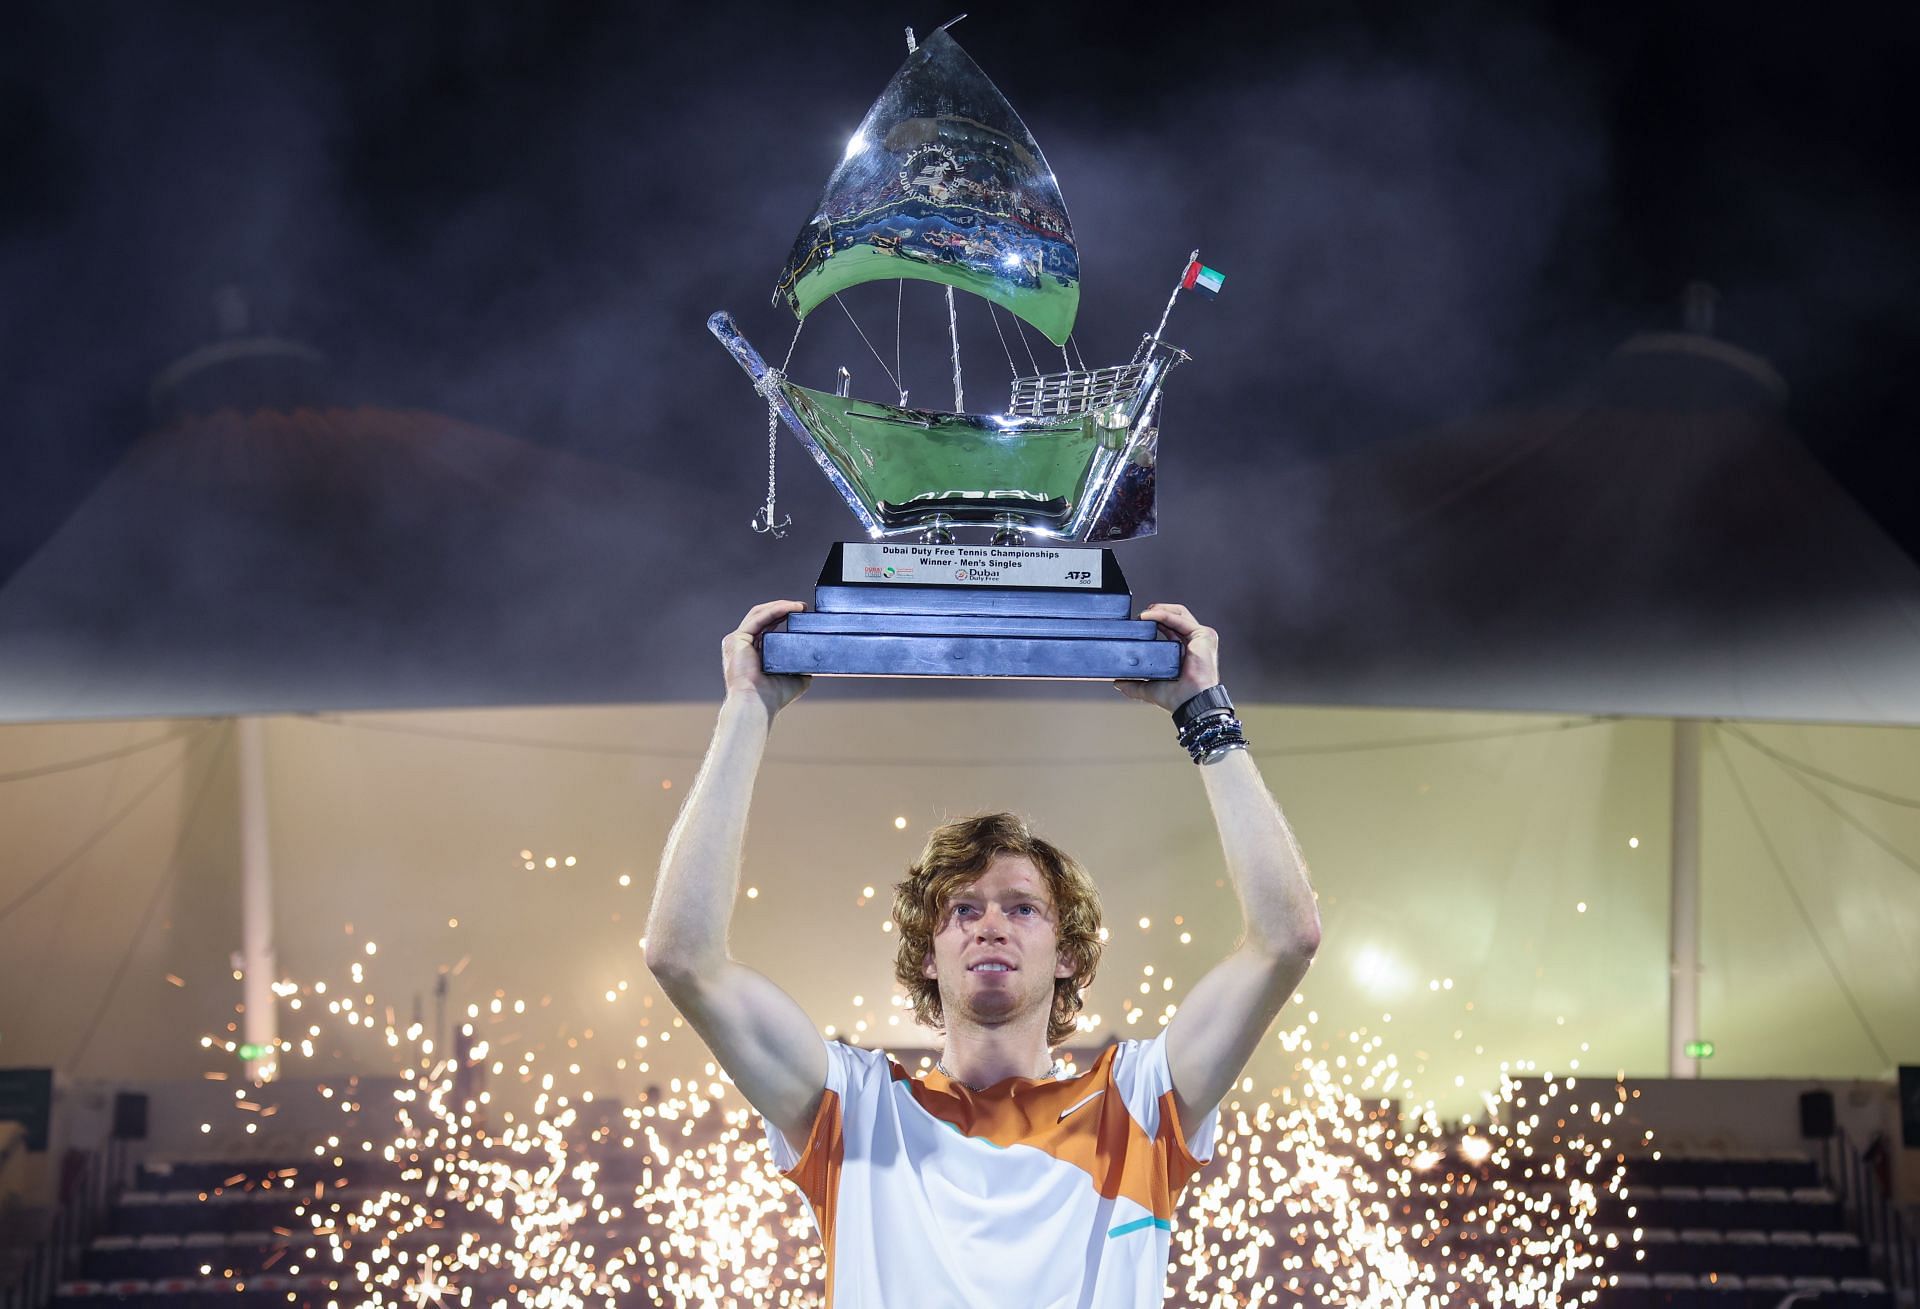 Andrey Rublev won his tenth career title